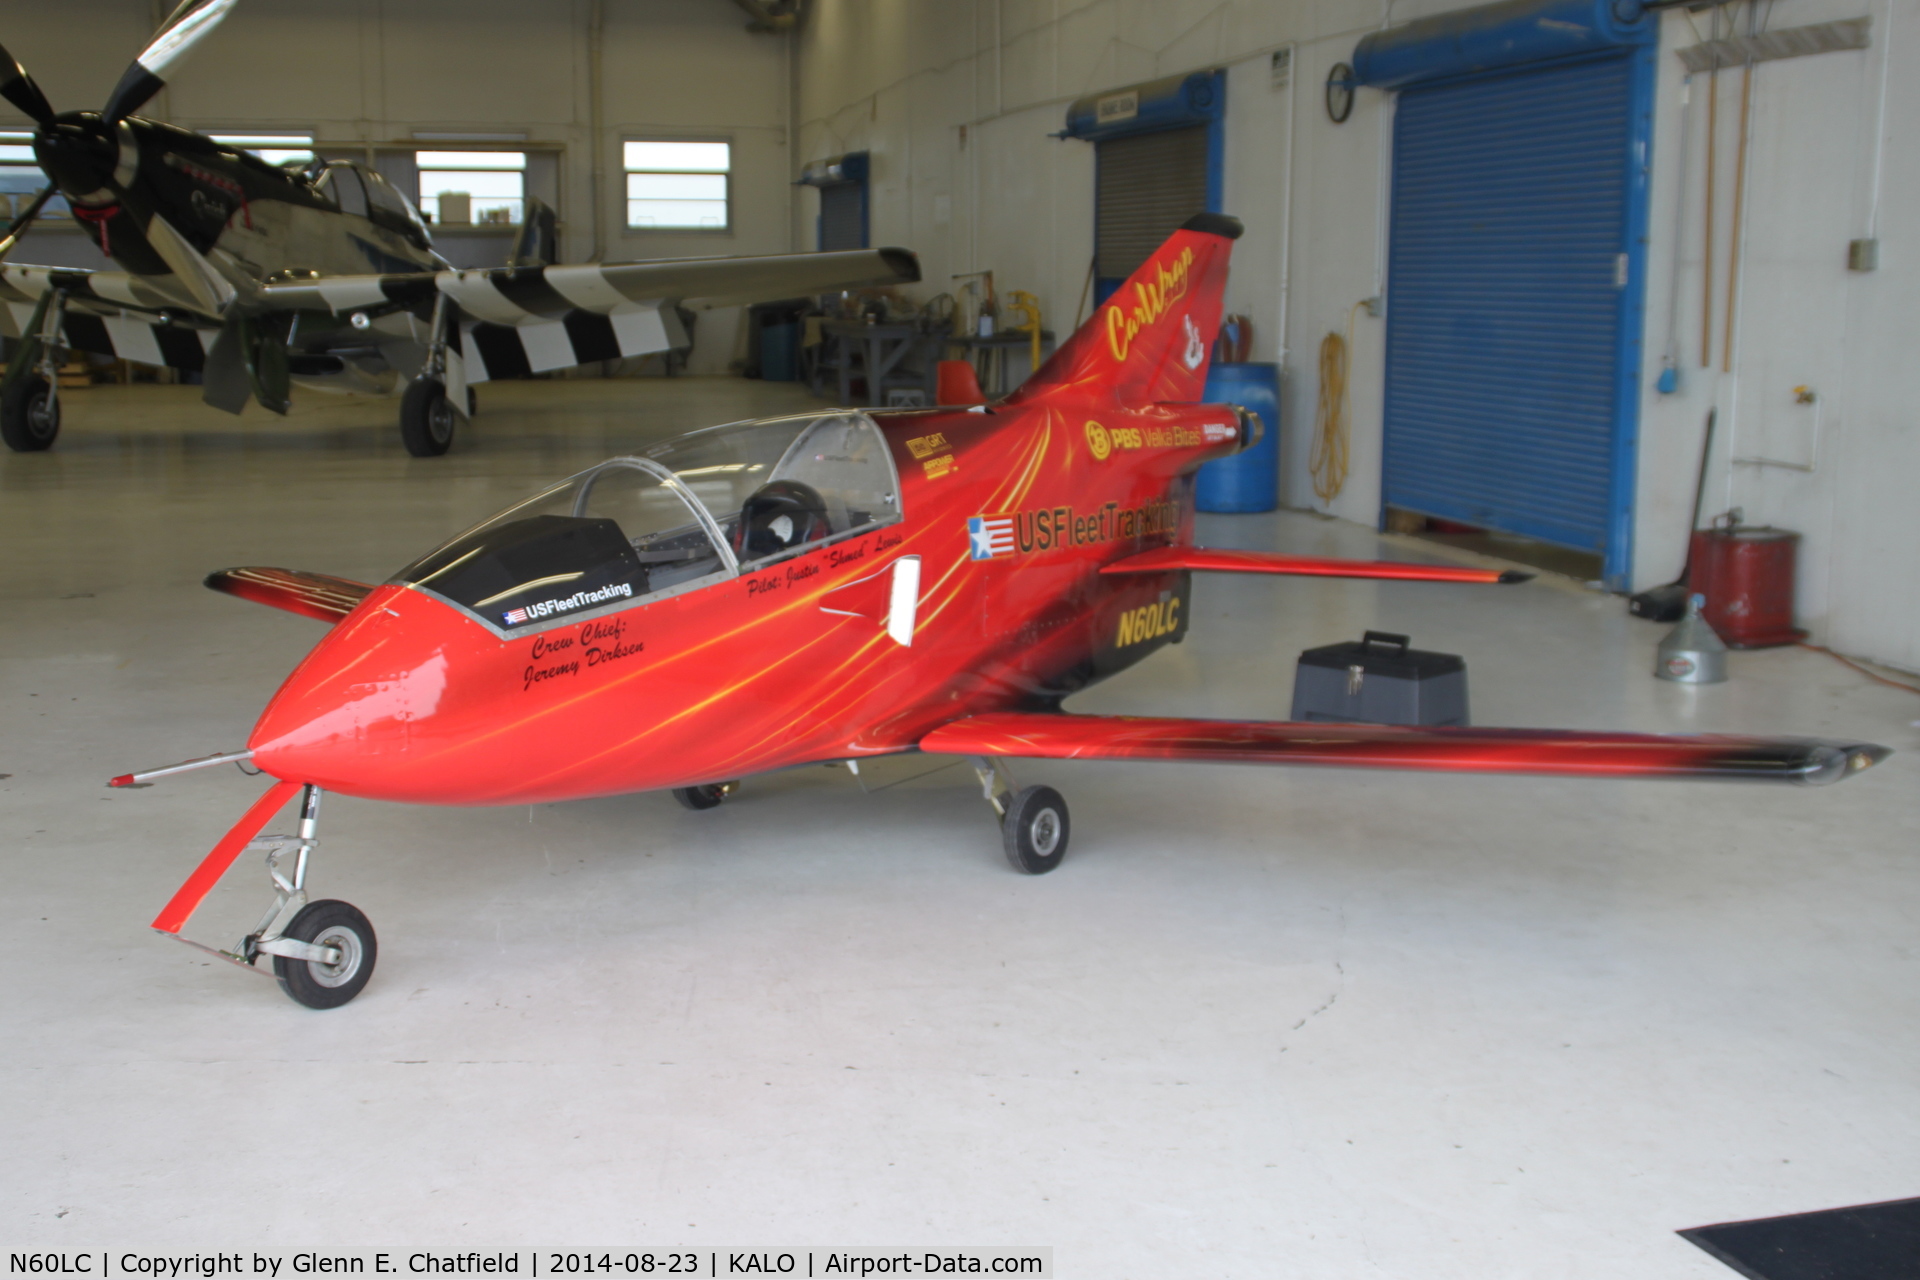 N60LC, 2010 Bede BD-5J Acrostar Jet C/N 2010701, At the air show, in the hangar waiting out the rain.